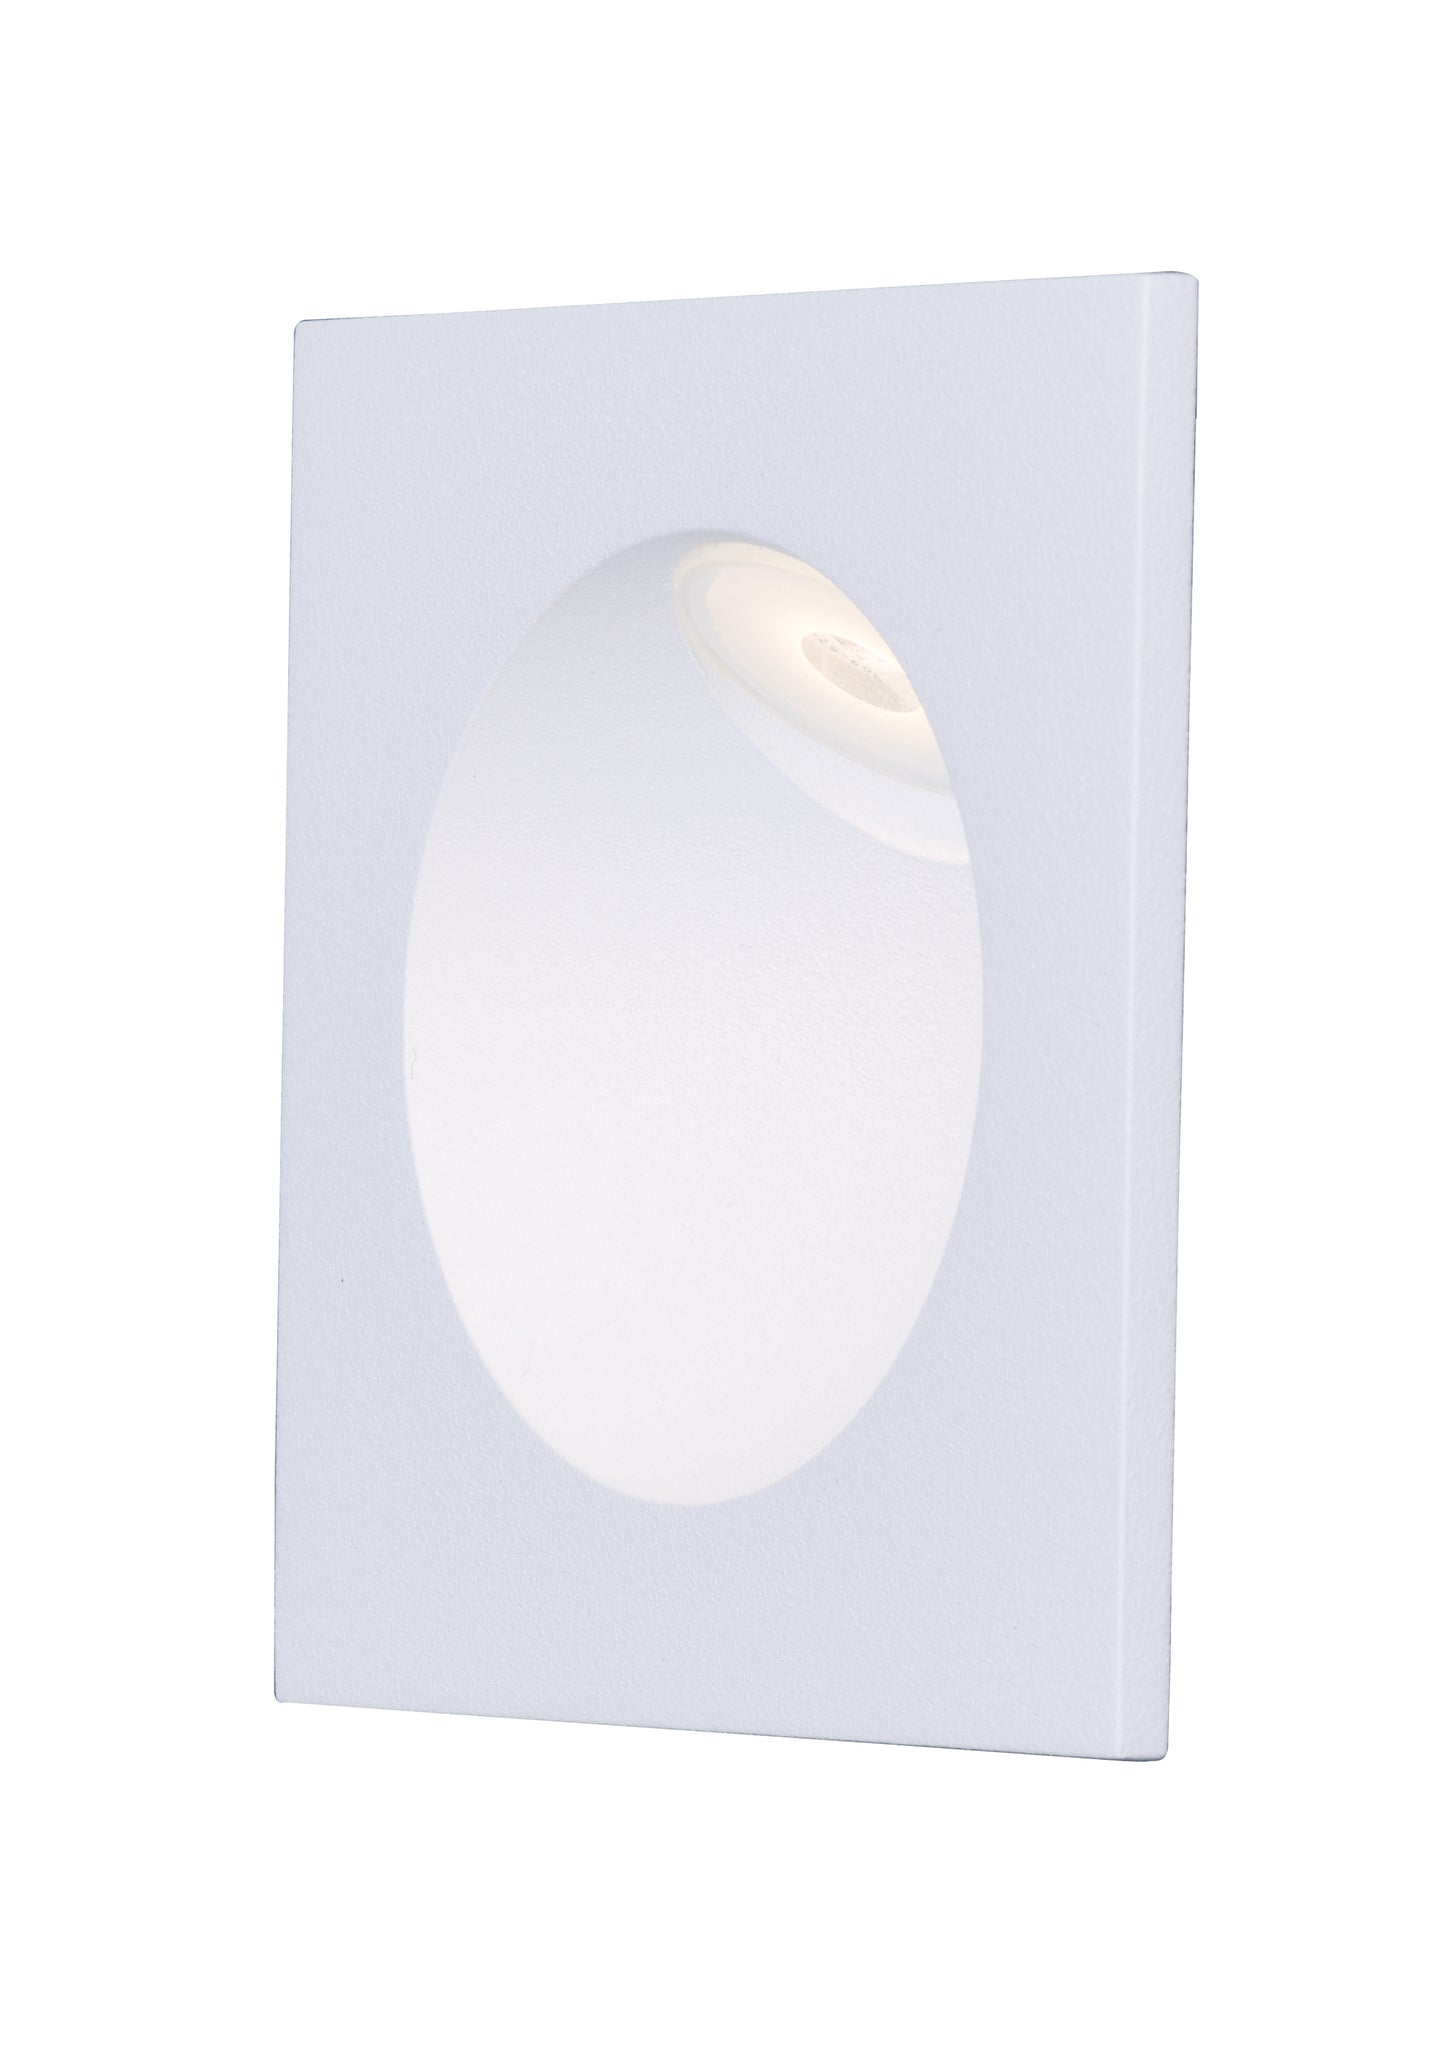 E41403-WT - Alumilux Step Light 3.25" Outdoor Wall Sconce - White